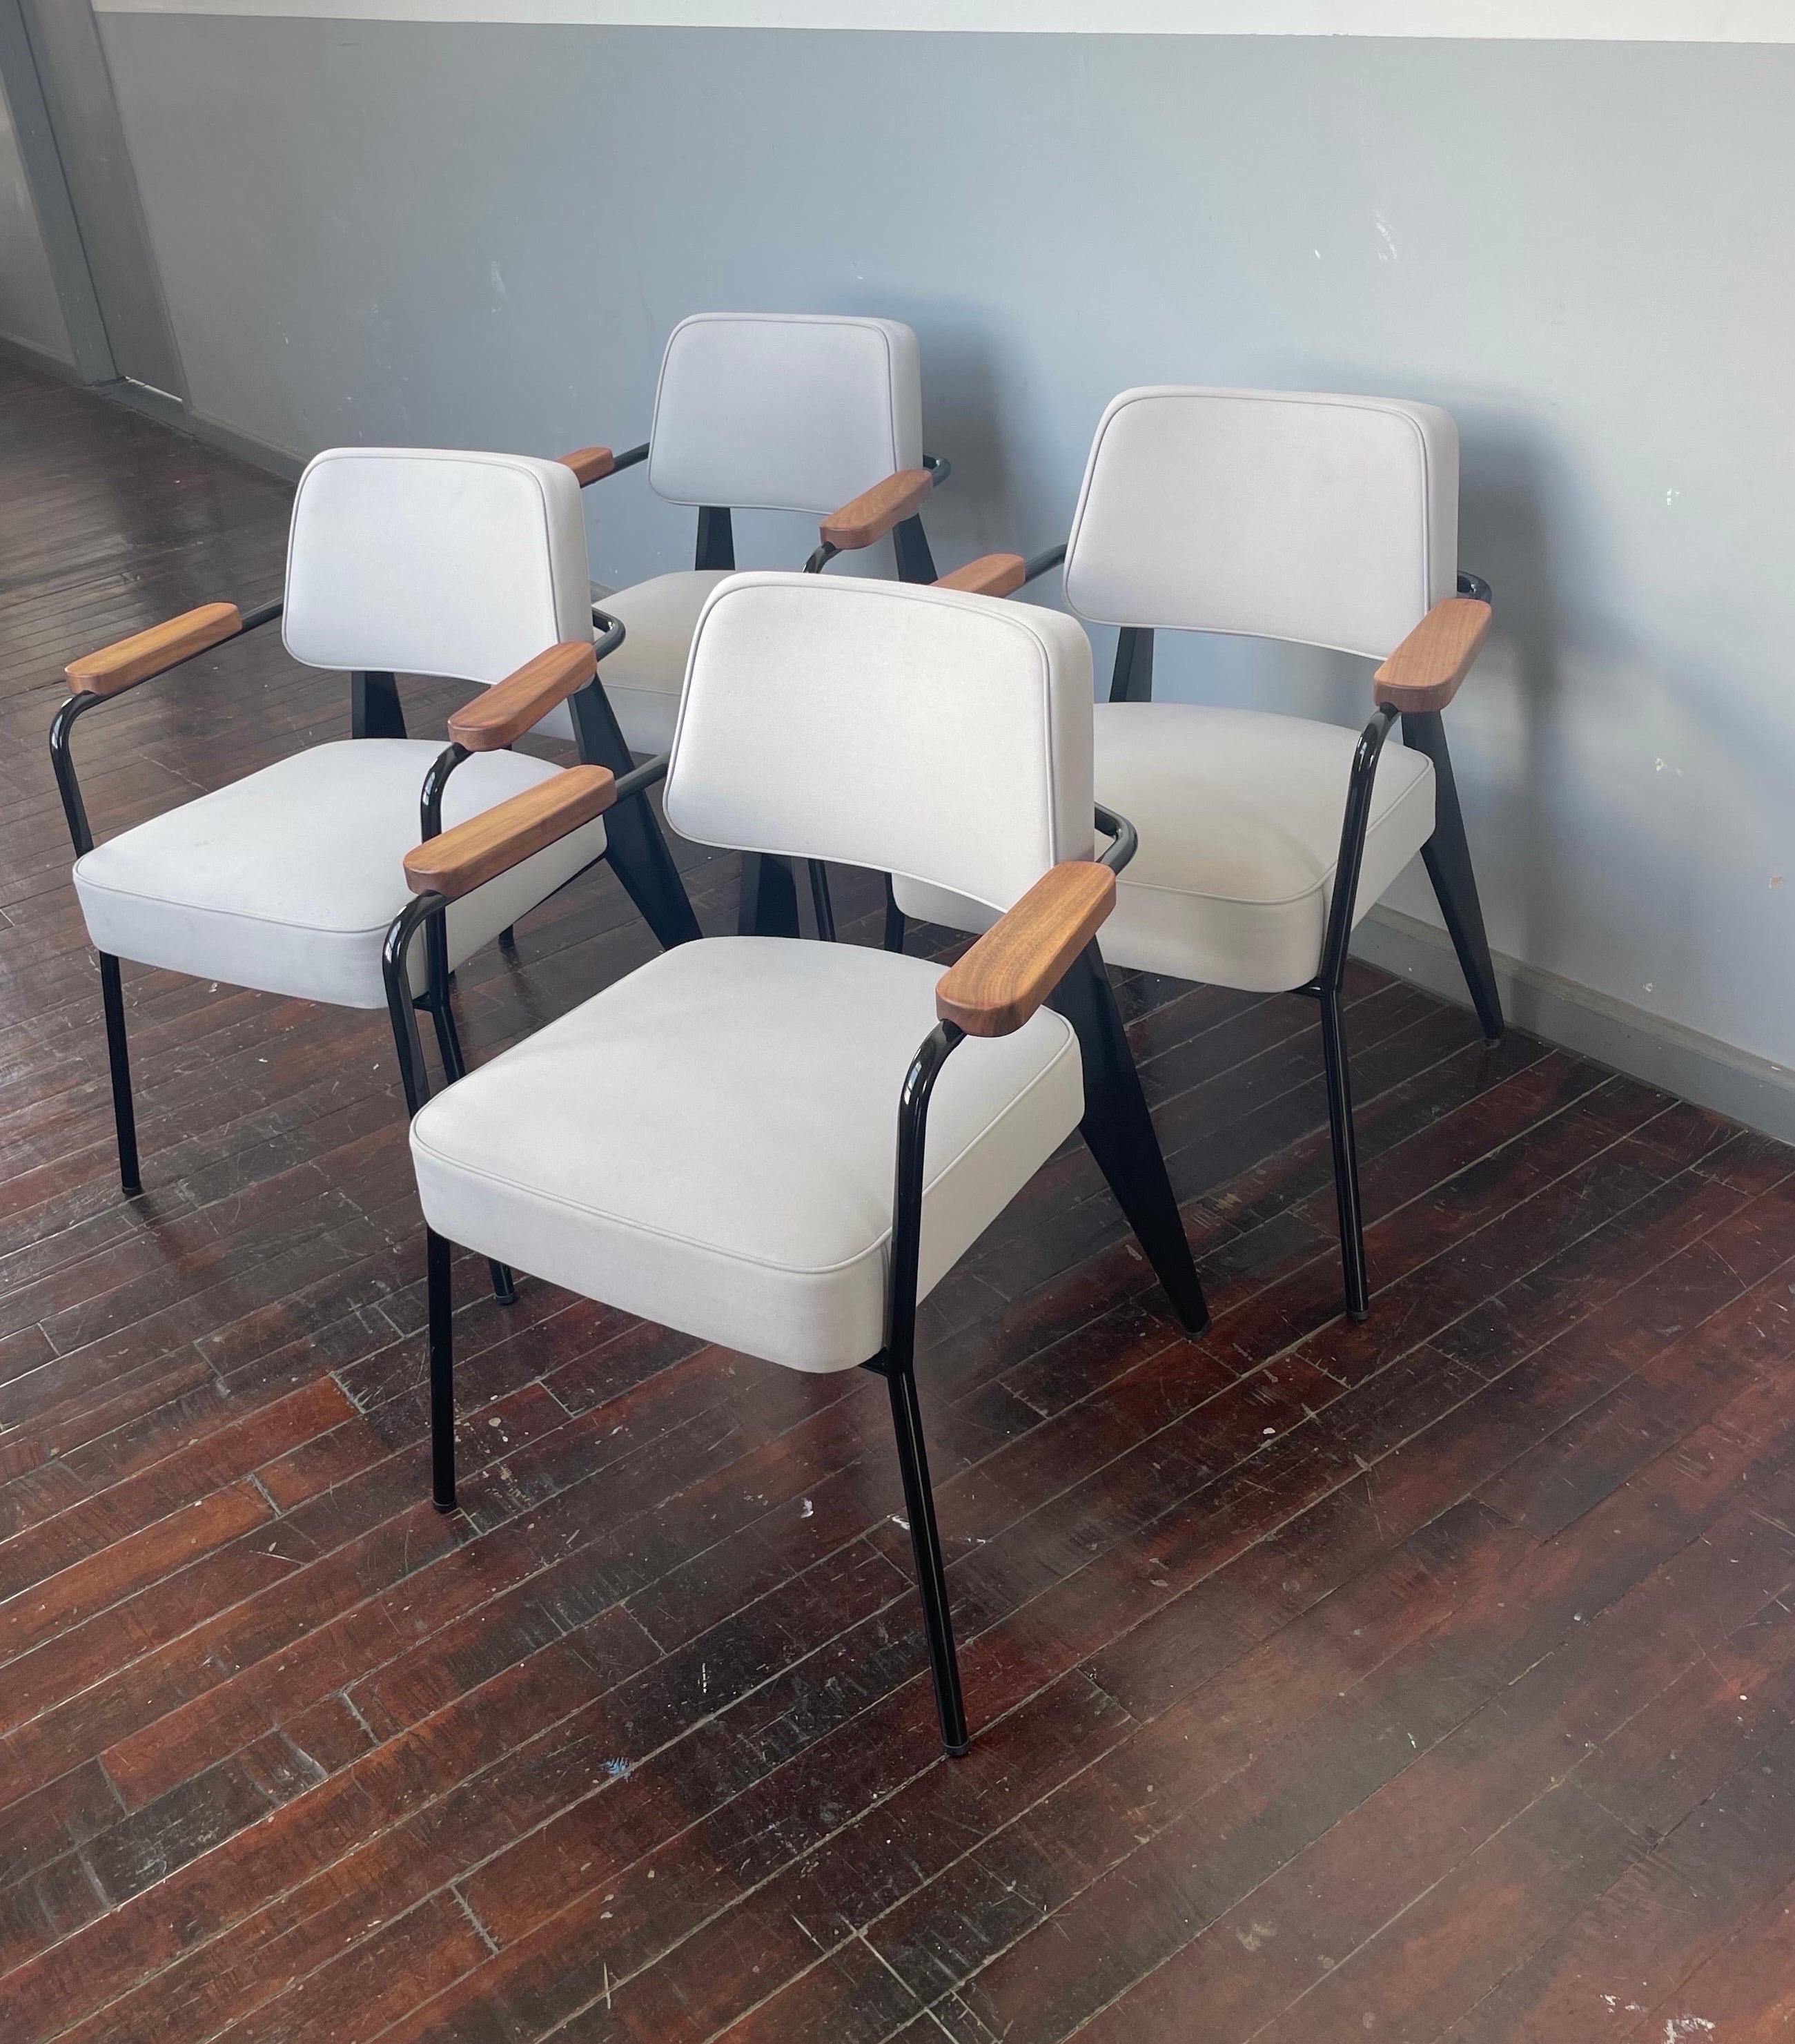 Originally designed by Jean Prouvé in 1939.

Set of 4 chairs in very good overall condition. These can also be sold as a set of two.

Light grey fabric. 

Extremely comfortable and supportive chair.

Can be used as a dining chair as well. Arm height